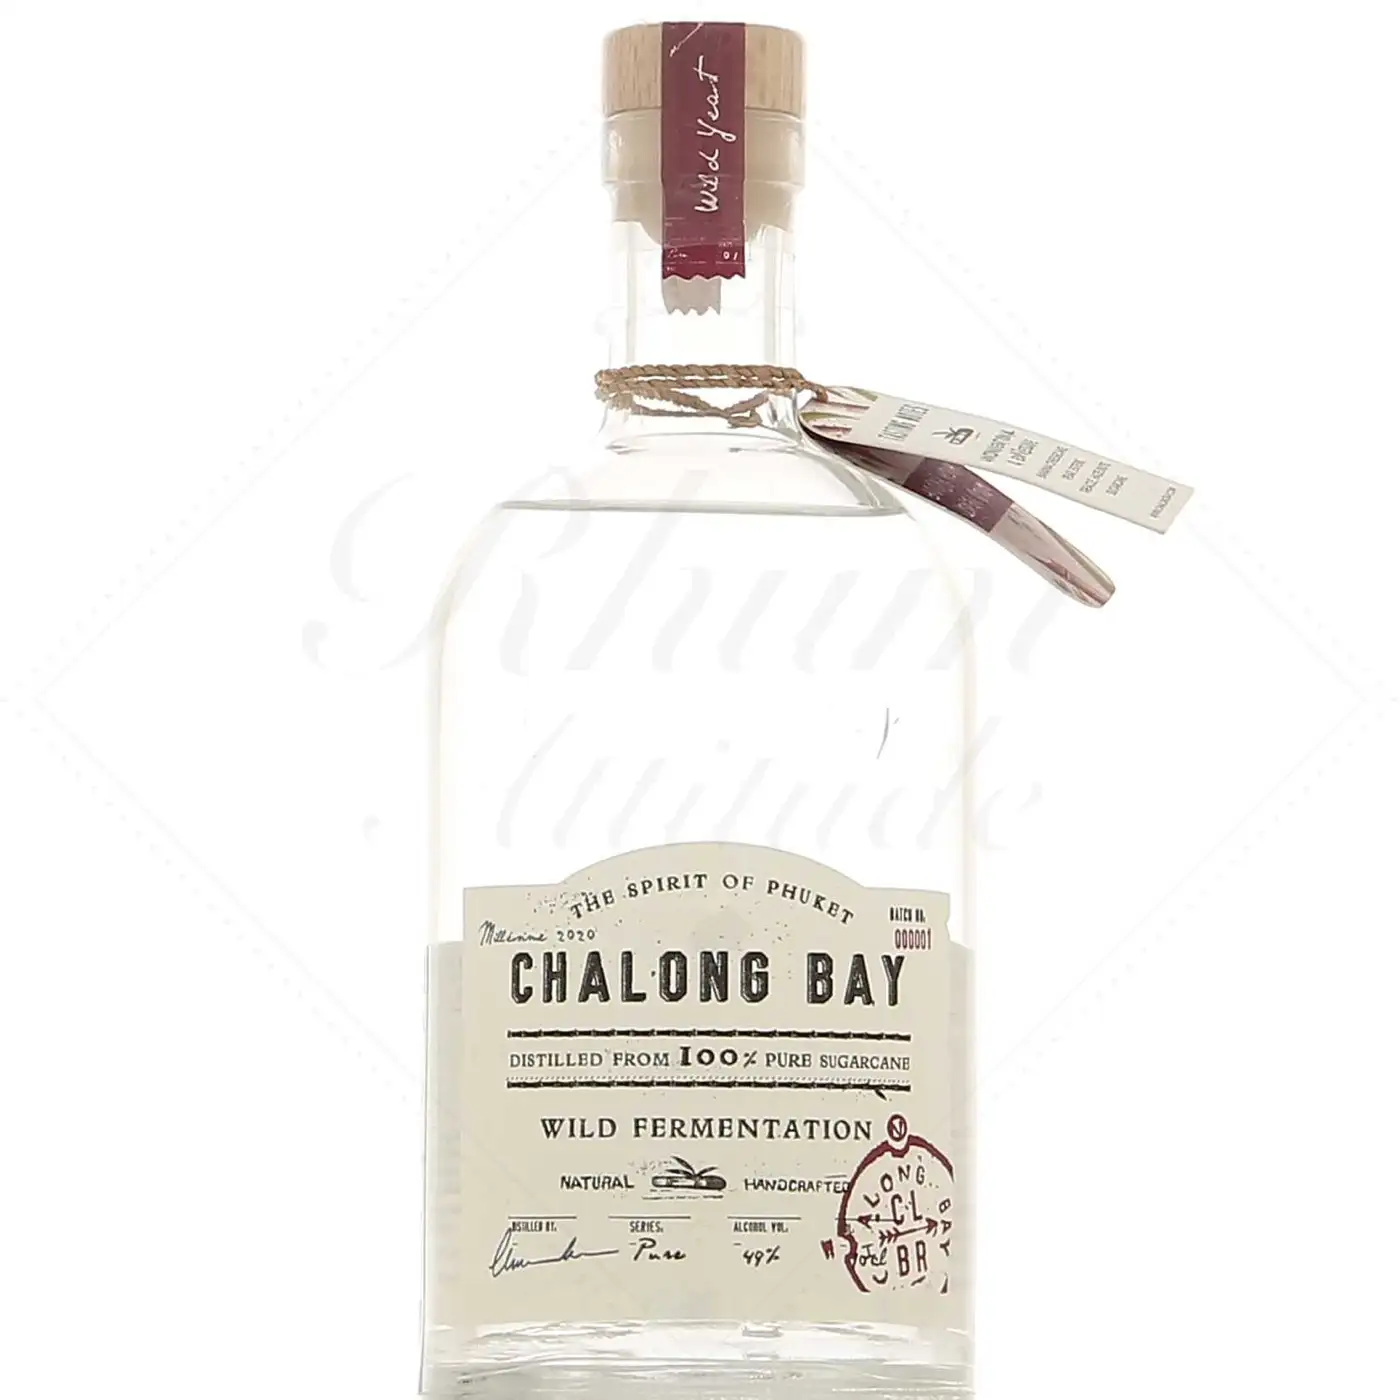 Image of the front of the bottle of the rum Chalong Bay Wild Fermentation / High Proof